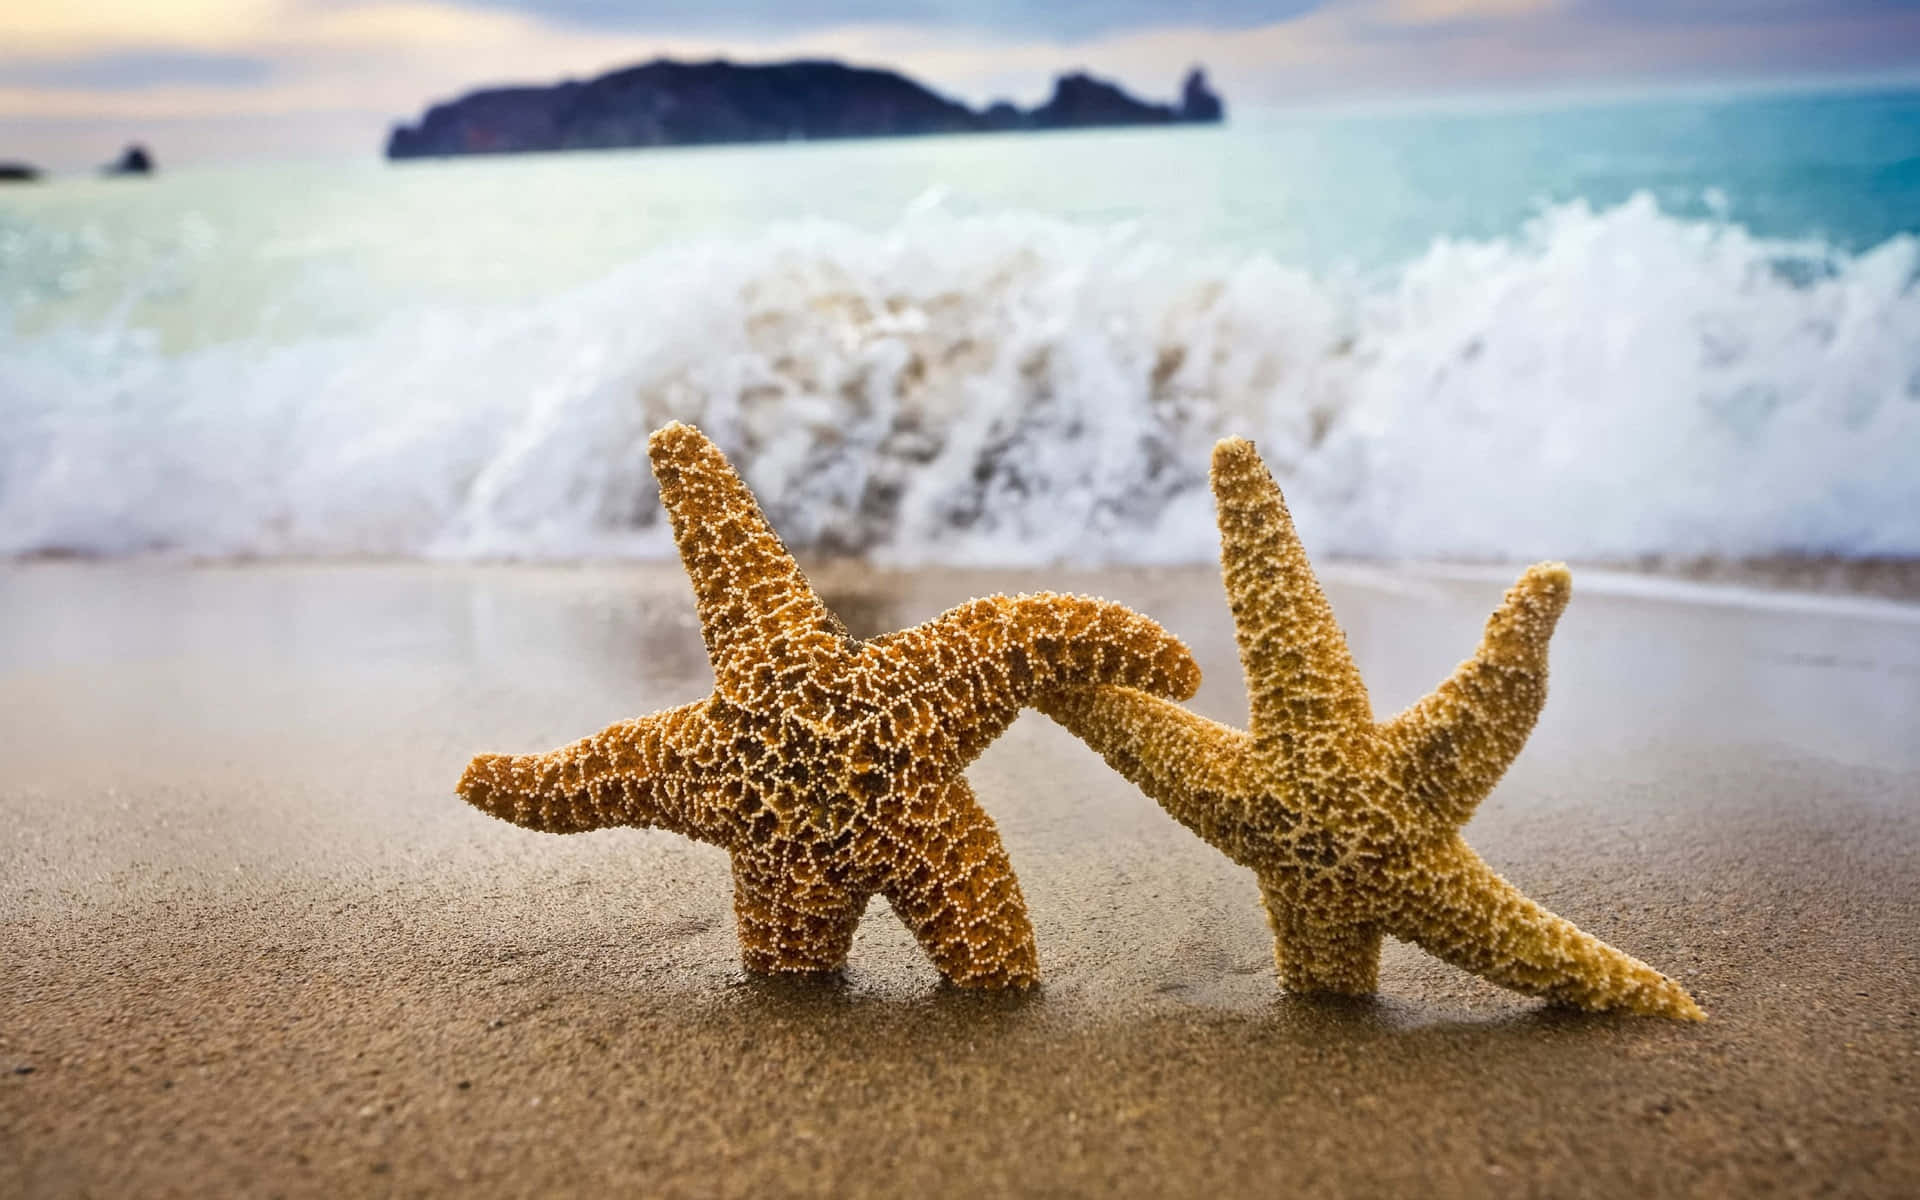 Glowing five-armed sea star against the sun-washed shore